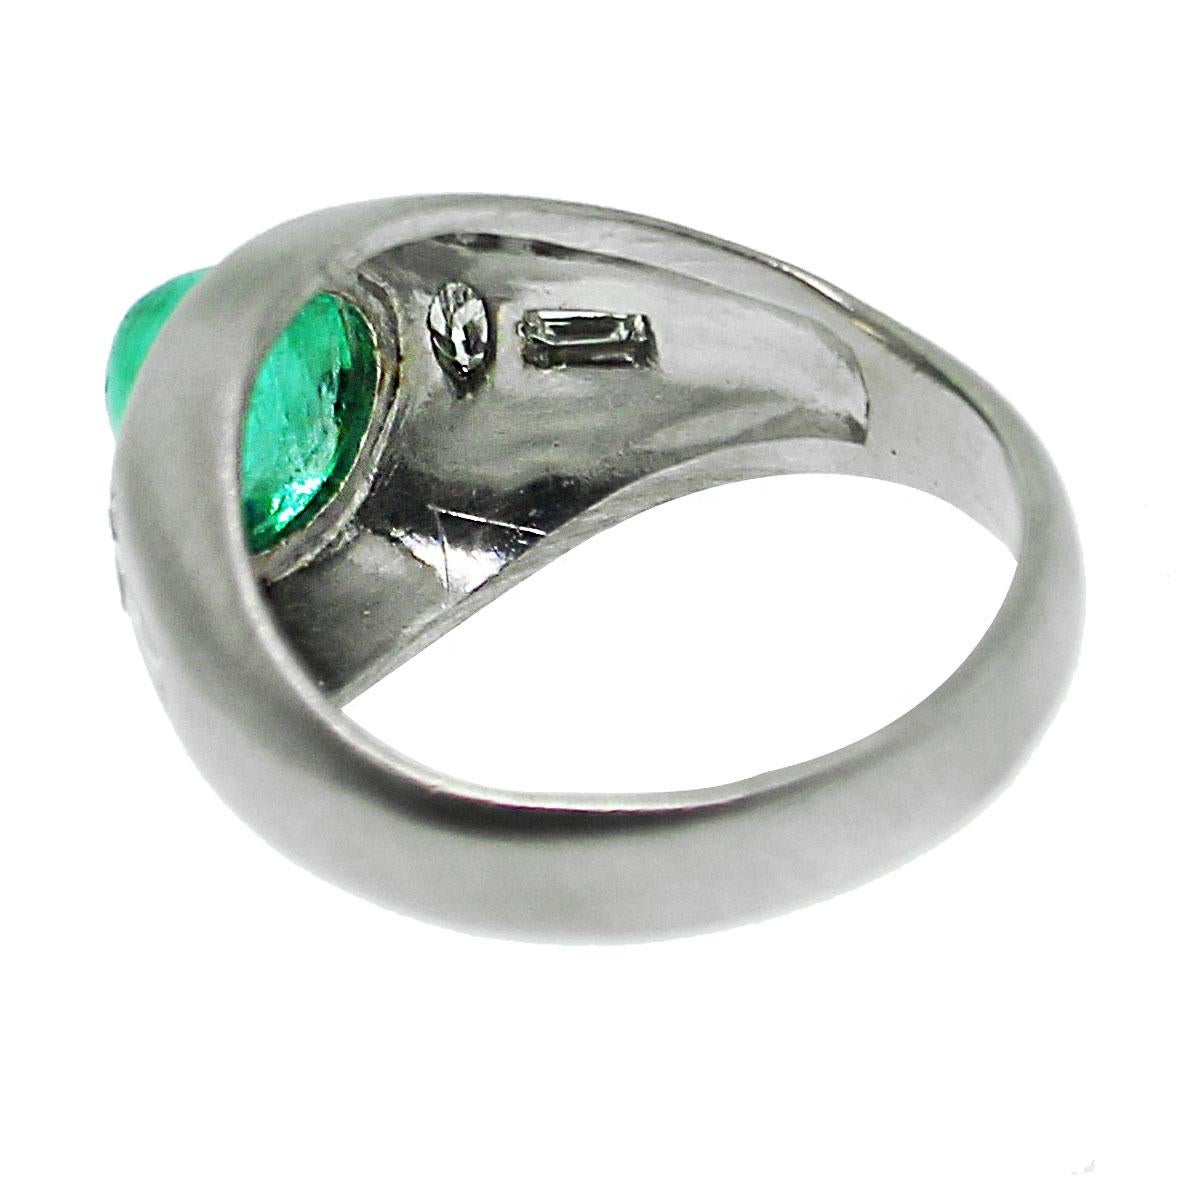 1.50 Carat Emerald Ring In Excellent Condition For Sale In Boca Raton, FL